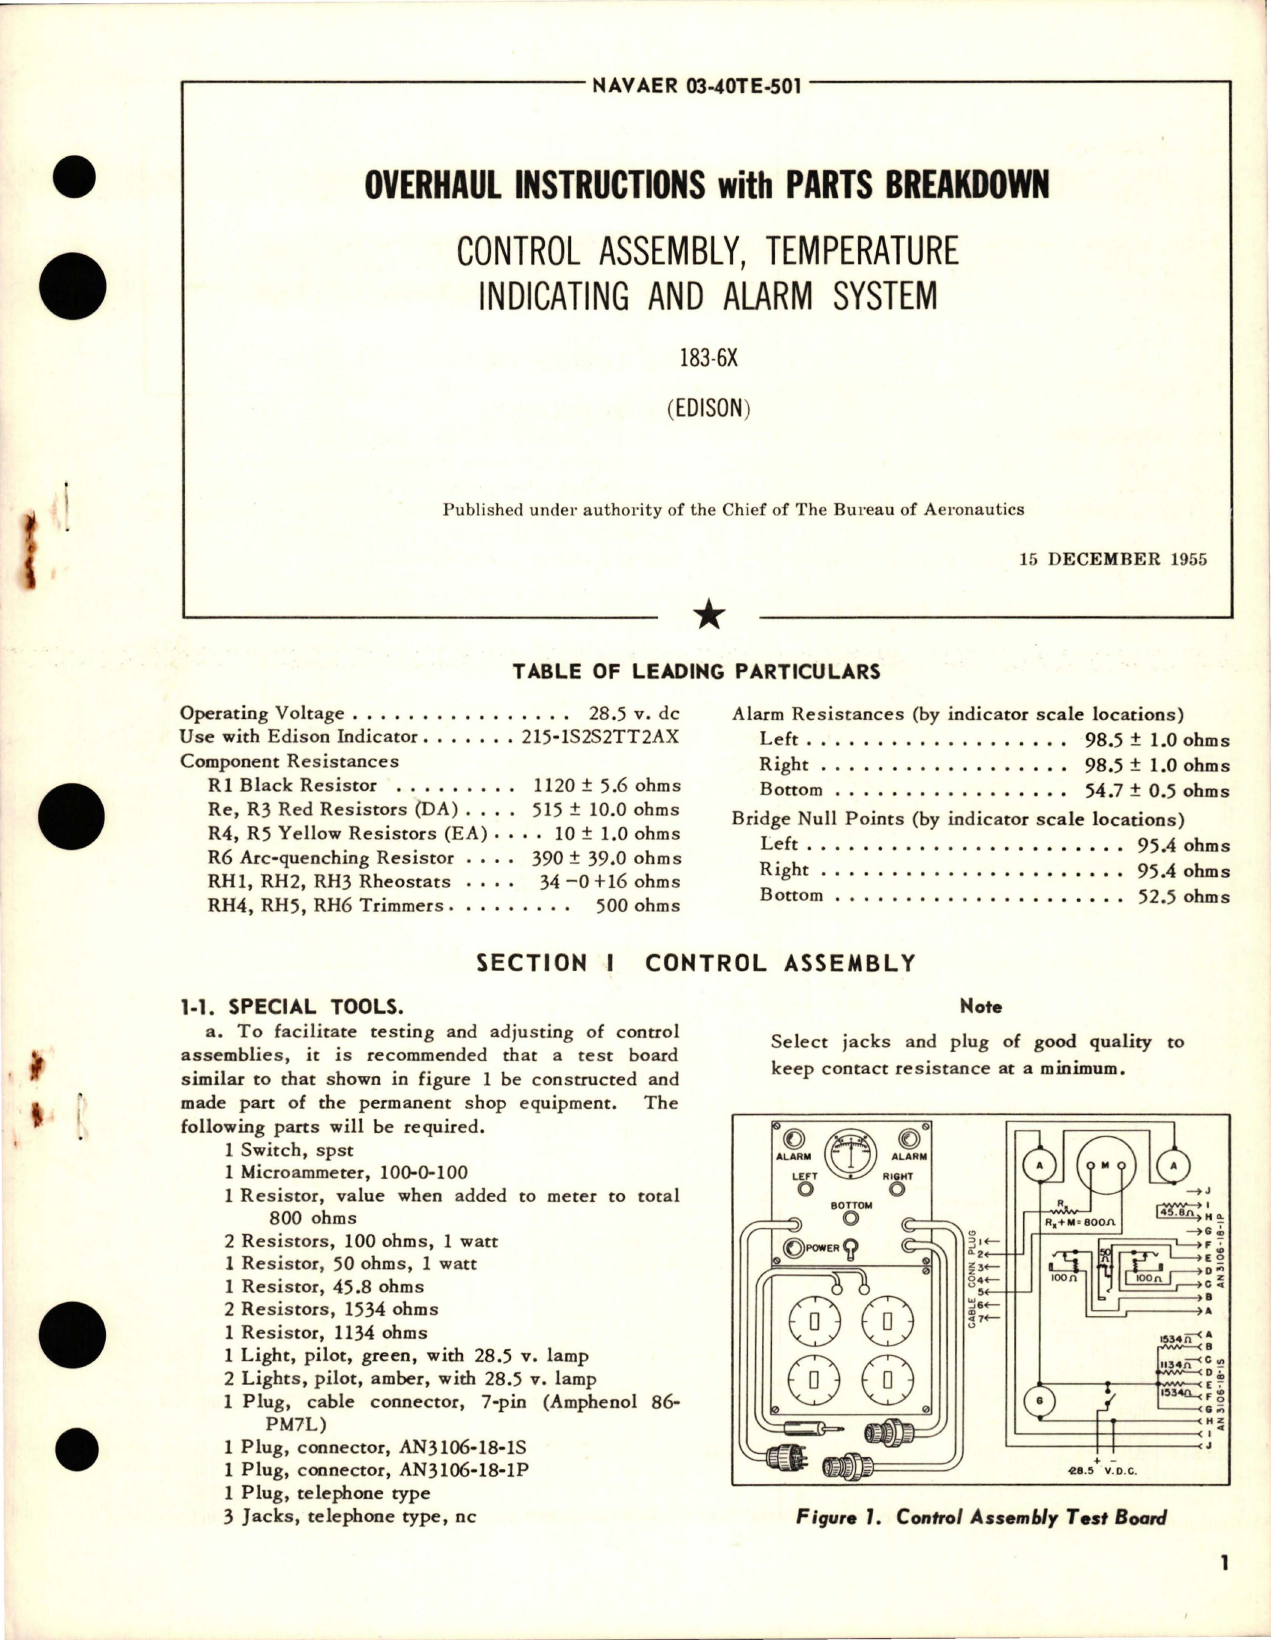 Sample page 1 from AirCorps Library document: Overhaul Instructions with Parts Breakdown for Temperature Indicating & Alarm System Control Assembly - 183-6X 